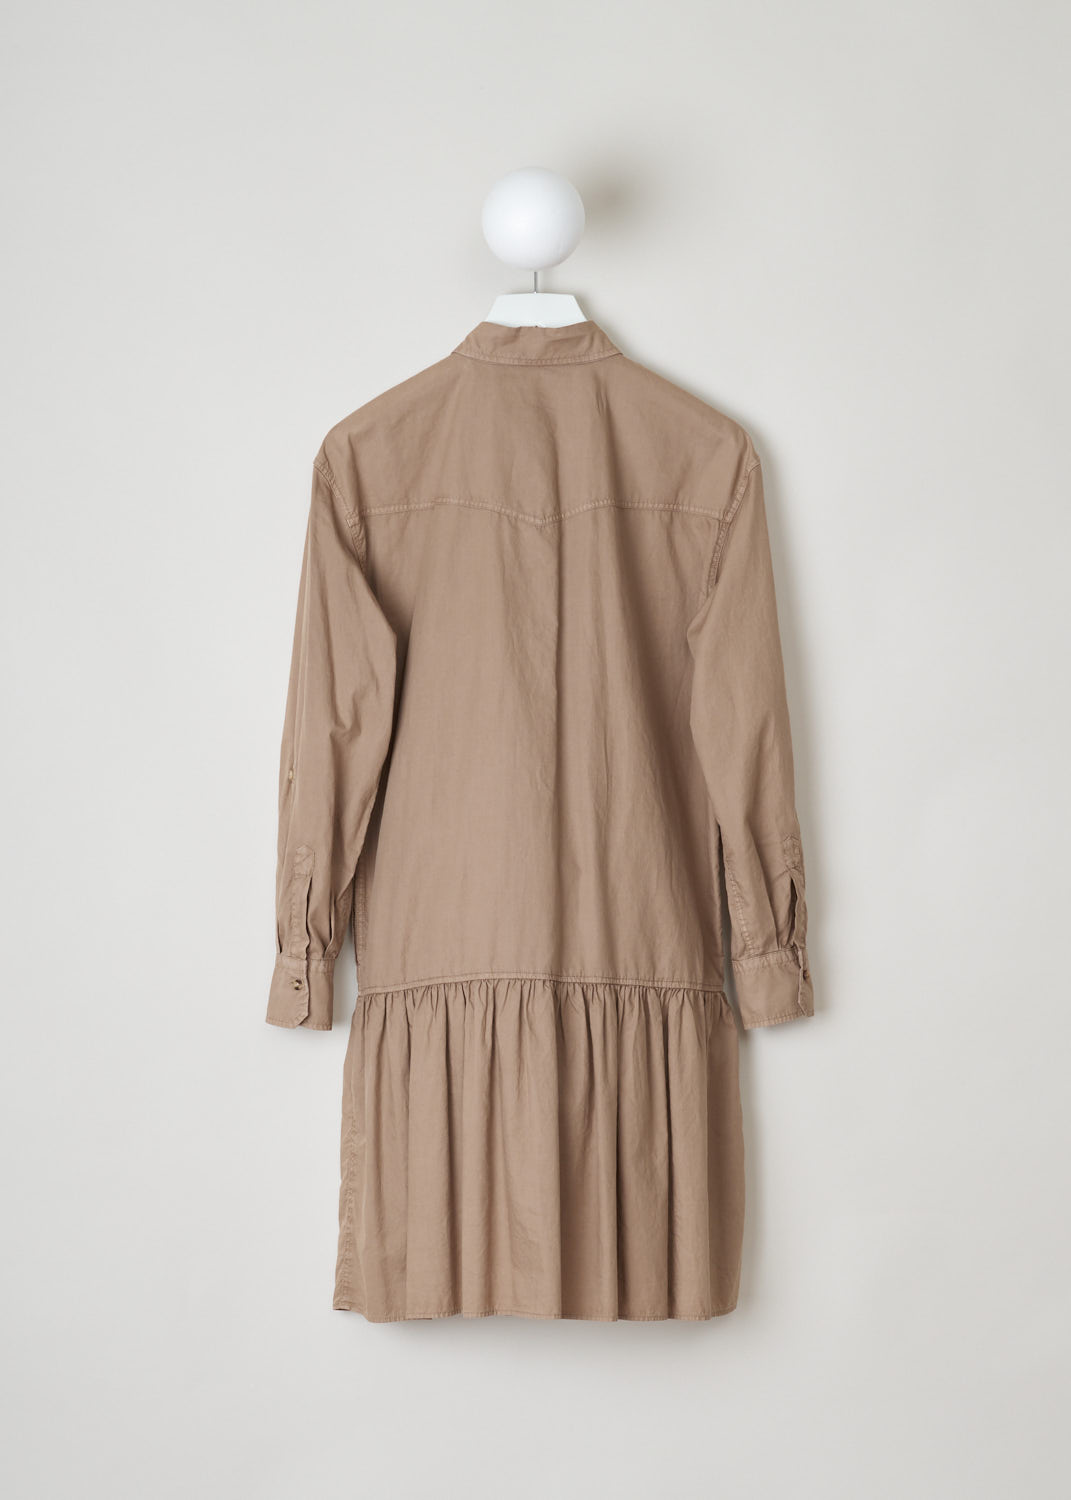 Brunello Cucinelli, Brown shirt dress, ML680AR321_C6067, brown, back, Brown shirt dress with a dropped waist. This cotton dress features a pointed collar, long sleeves with cuffs, which close with a single button. The signature, monili beads, on this model adorn the breast pockets. Your closing option is the buttons on the front.